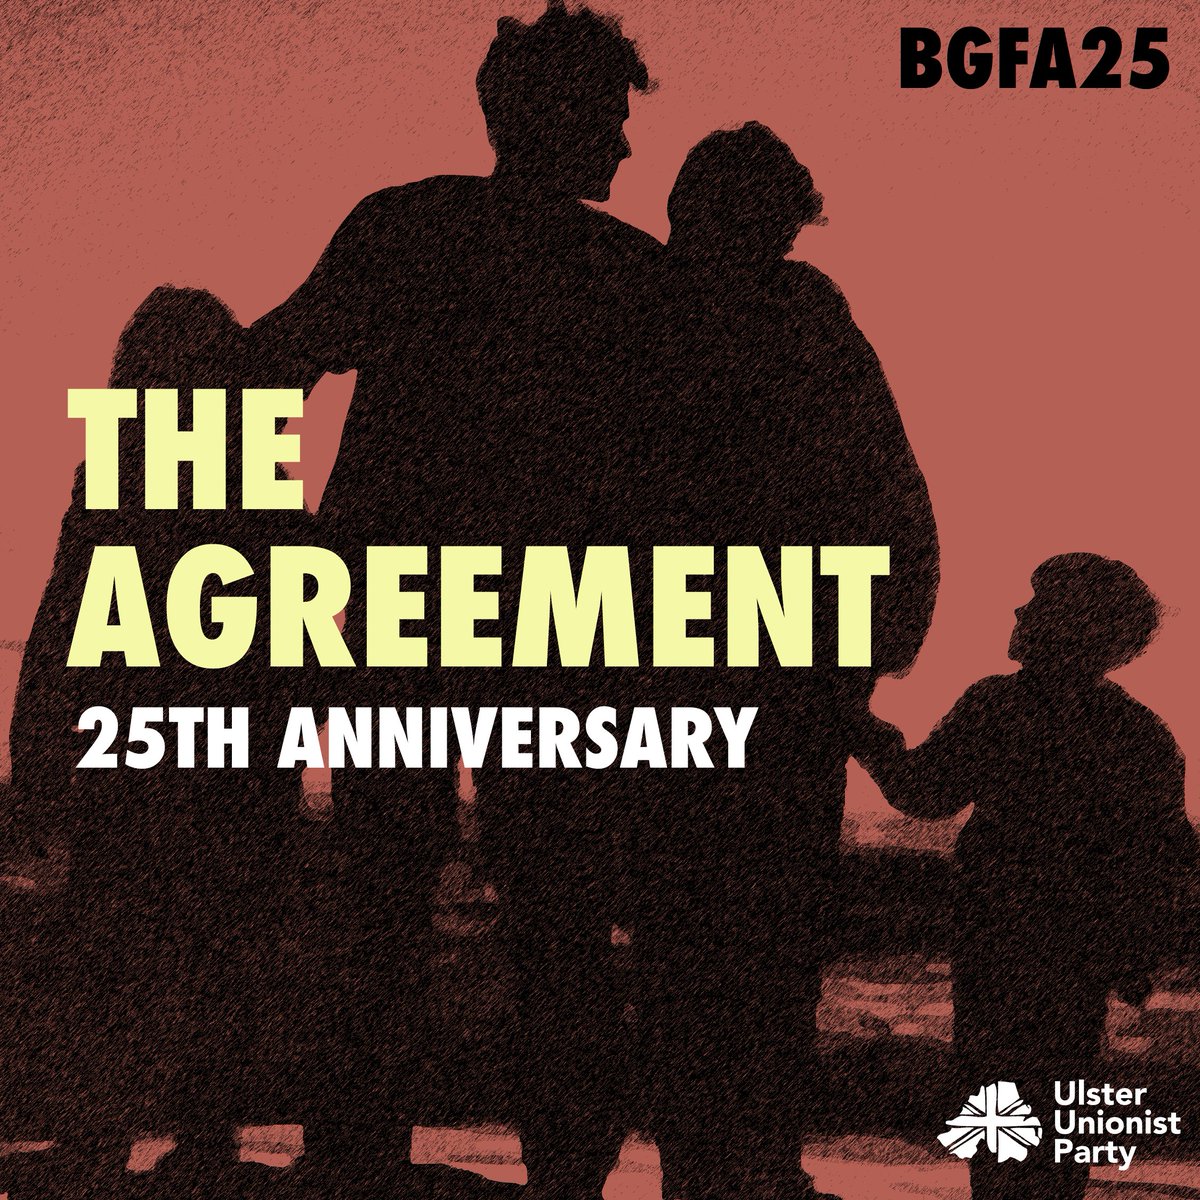 Today marks 25 years since the signing of the Belfast Good Friday Agreement.

We reflect on the legacy of the agreement and in particular the actions of our former Leader the late Lord Trimble and his negotiating team to deliver peace in Northern Ireland. 

#BGFA25